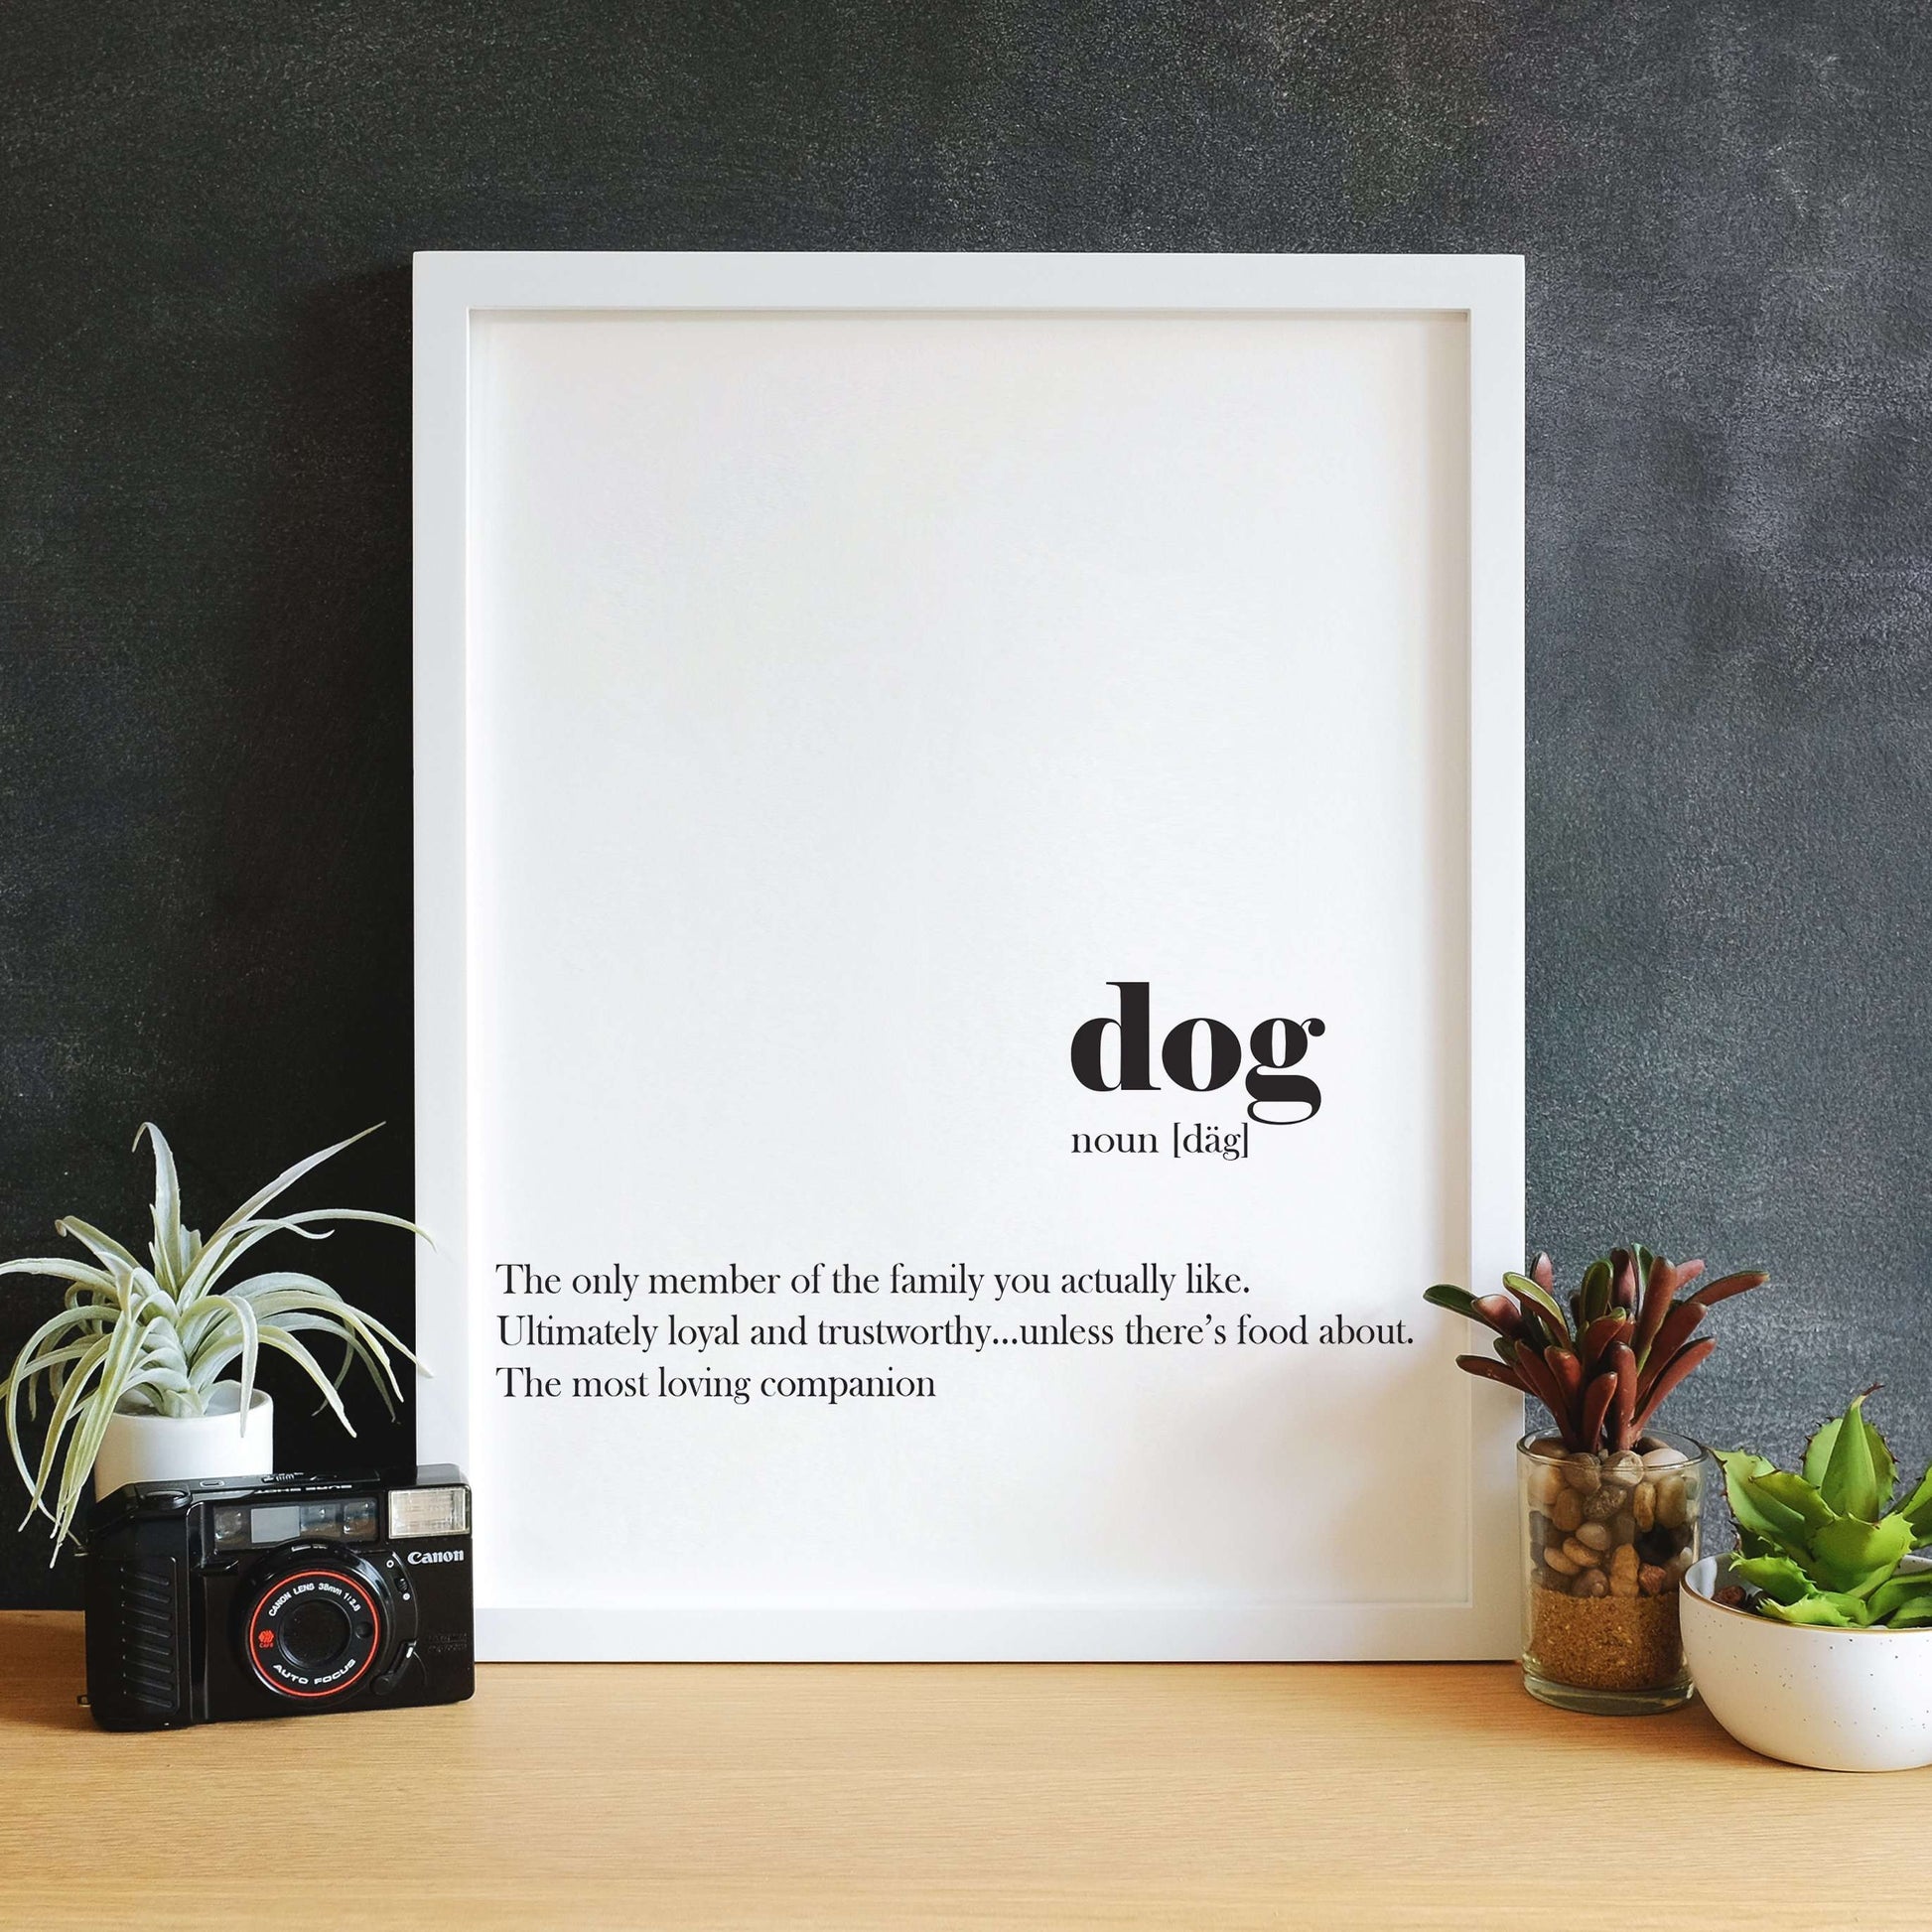 Dog framed definition quote print, dog art print quote prints